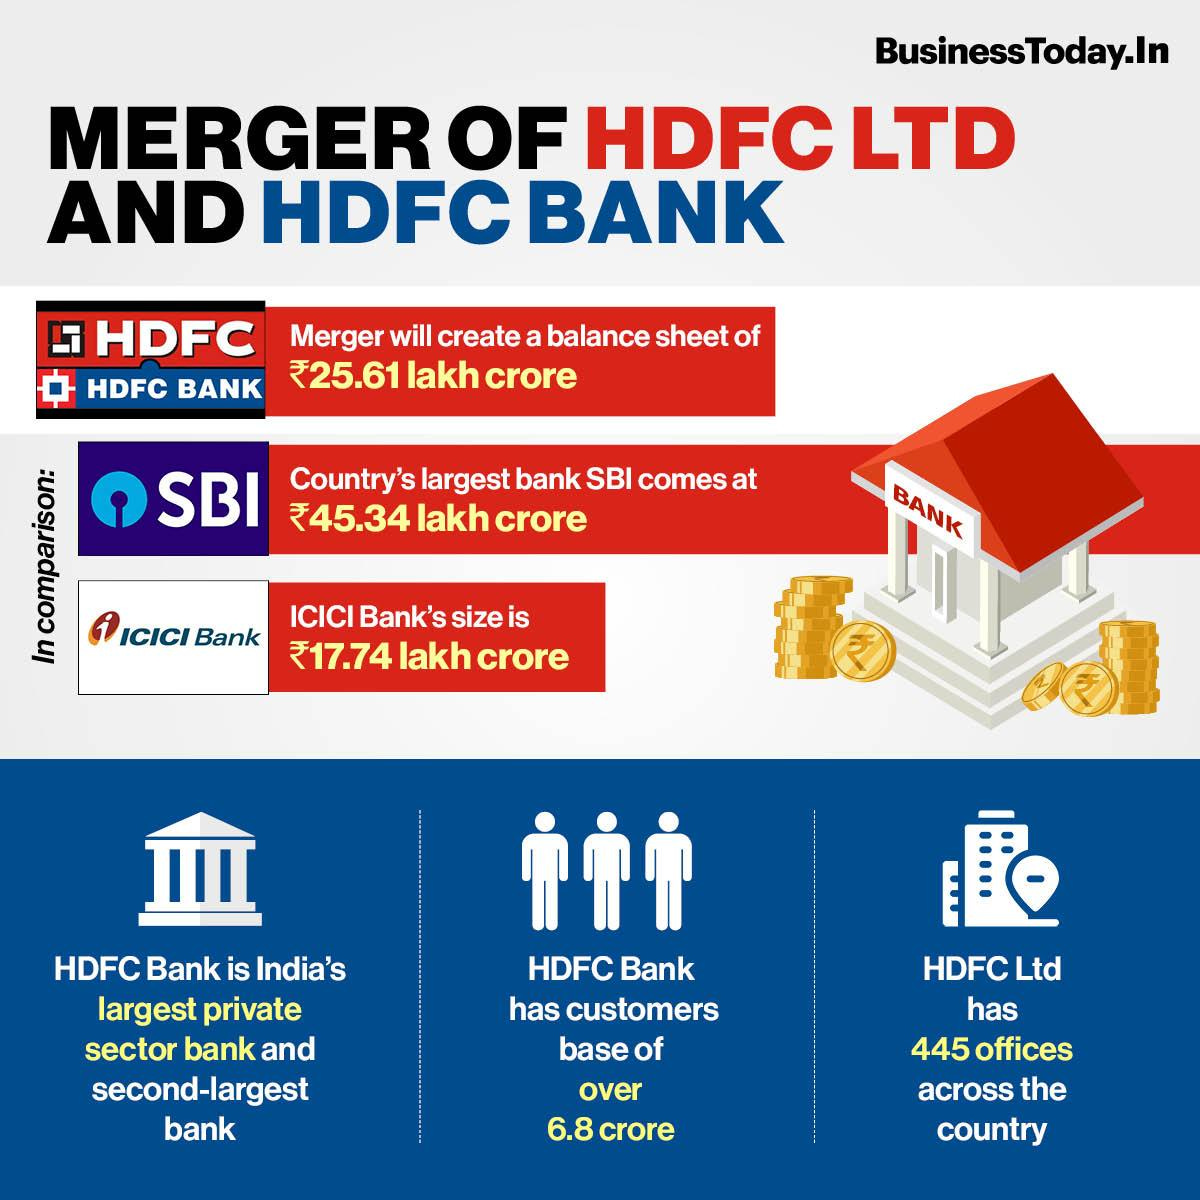 Explained: The main reasons behind the merger of HDFC and HDFC Bank -  BusinessToday